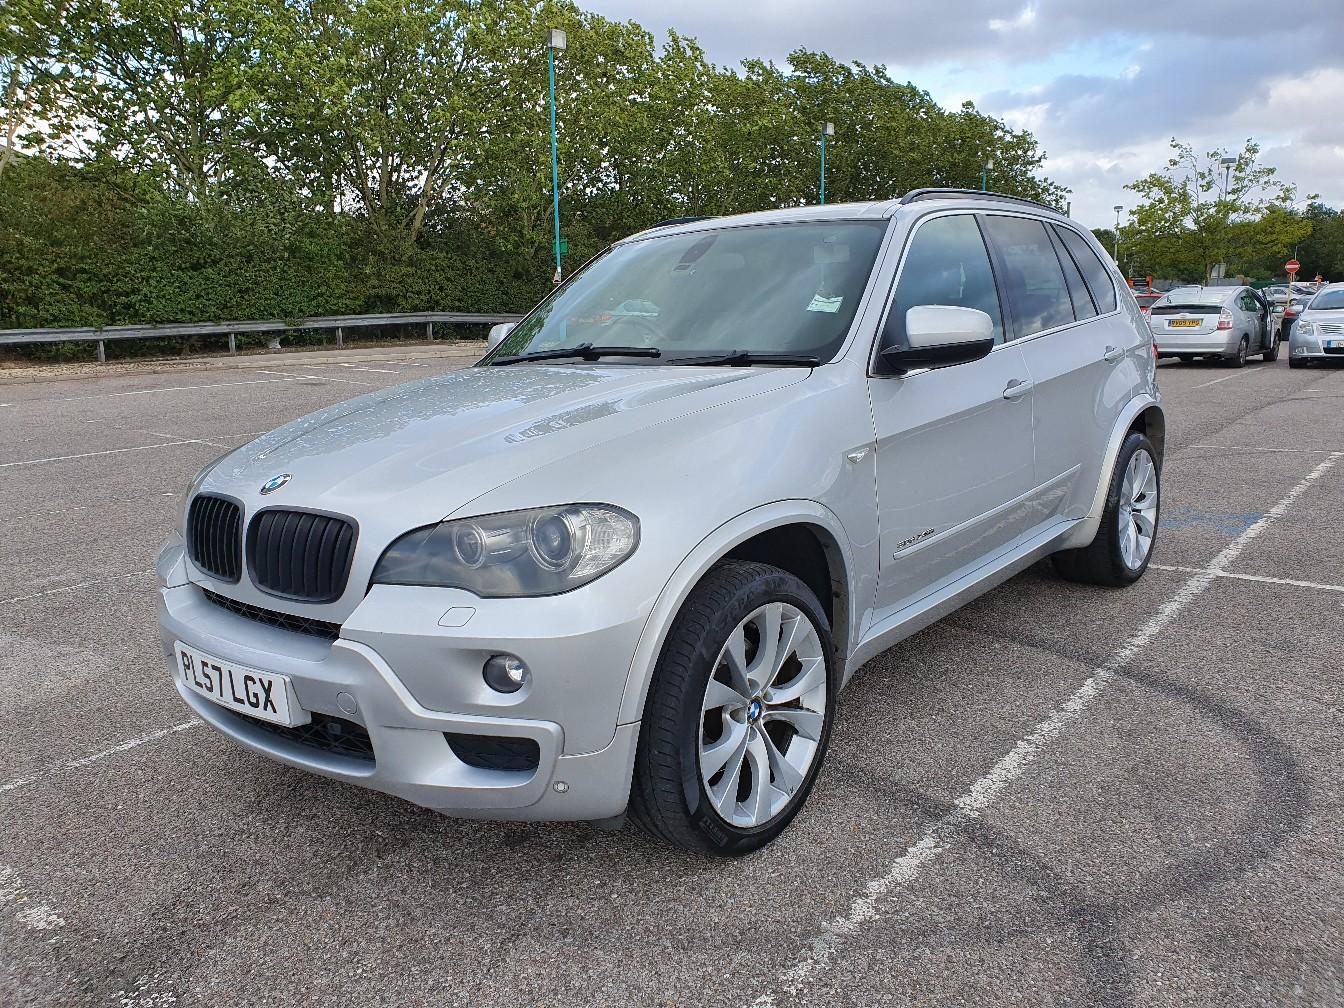 BMW X5 M Sport 7 Seater 78k Mileage in W2 Westminster for